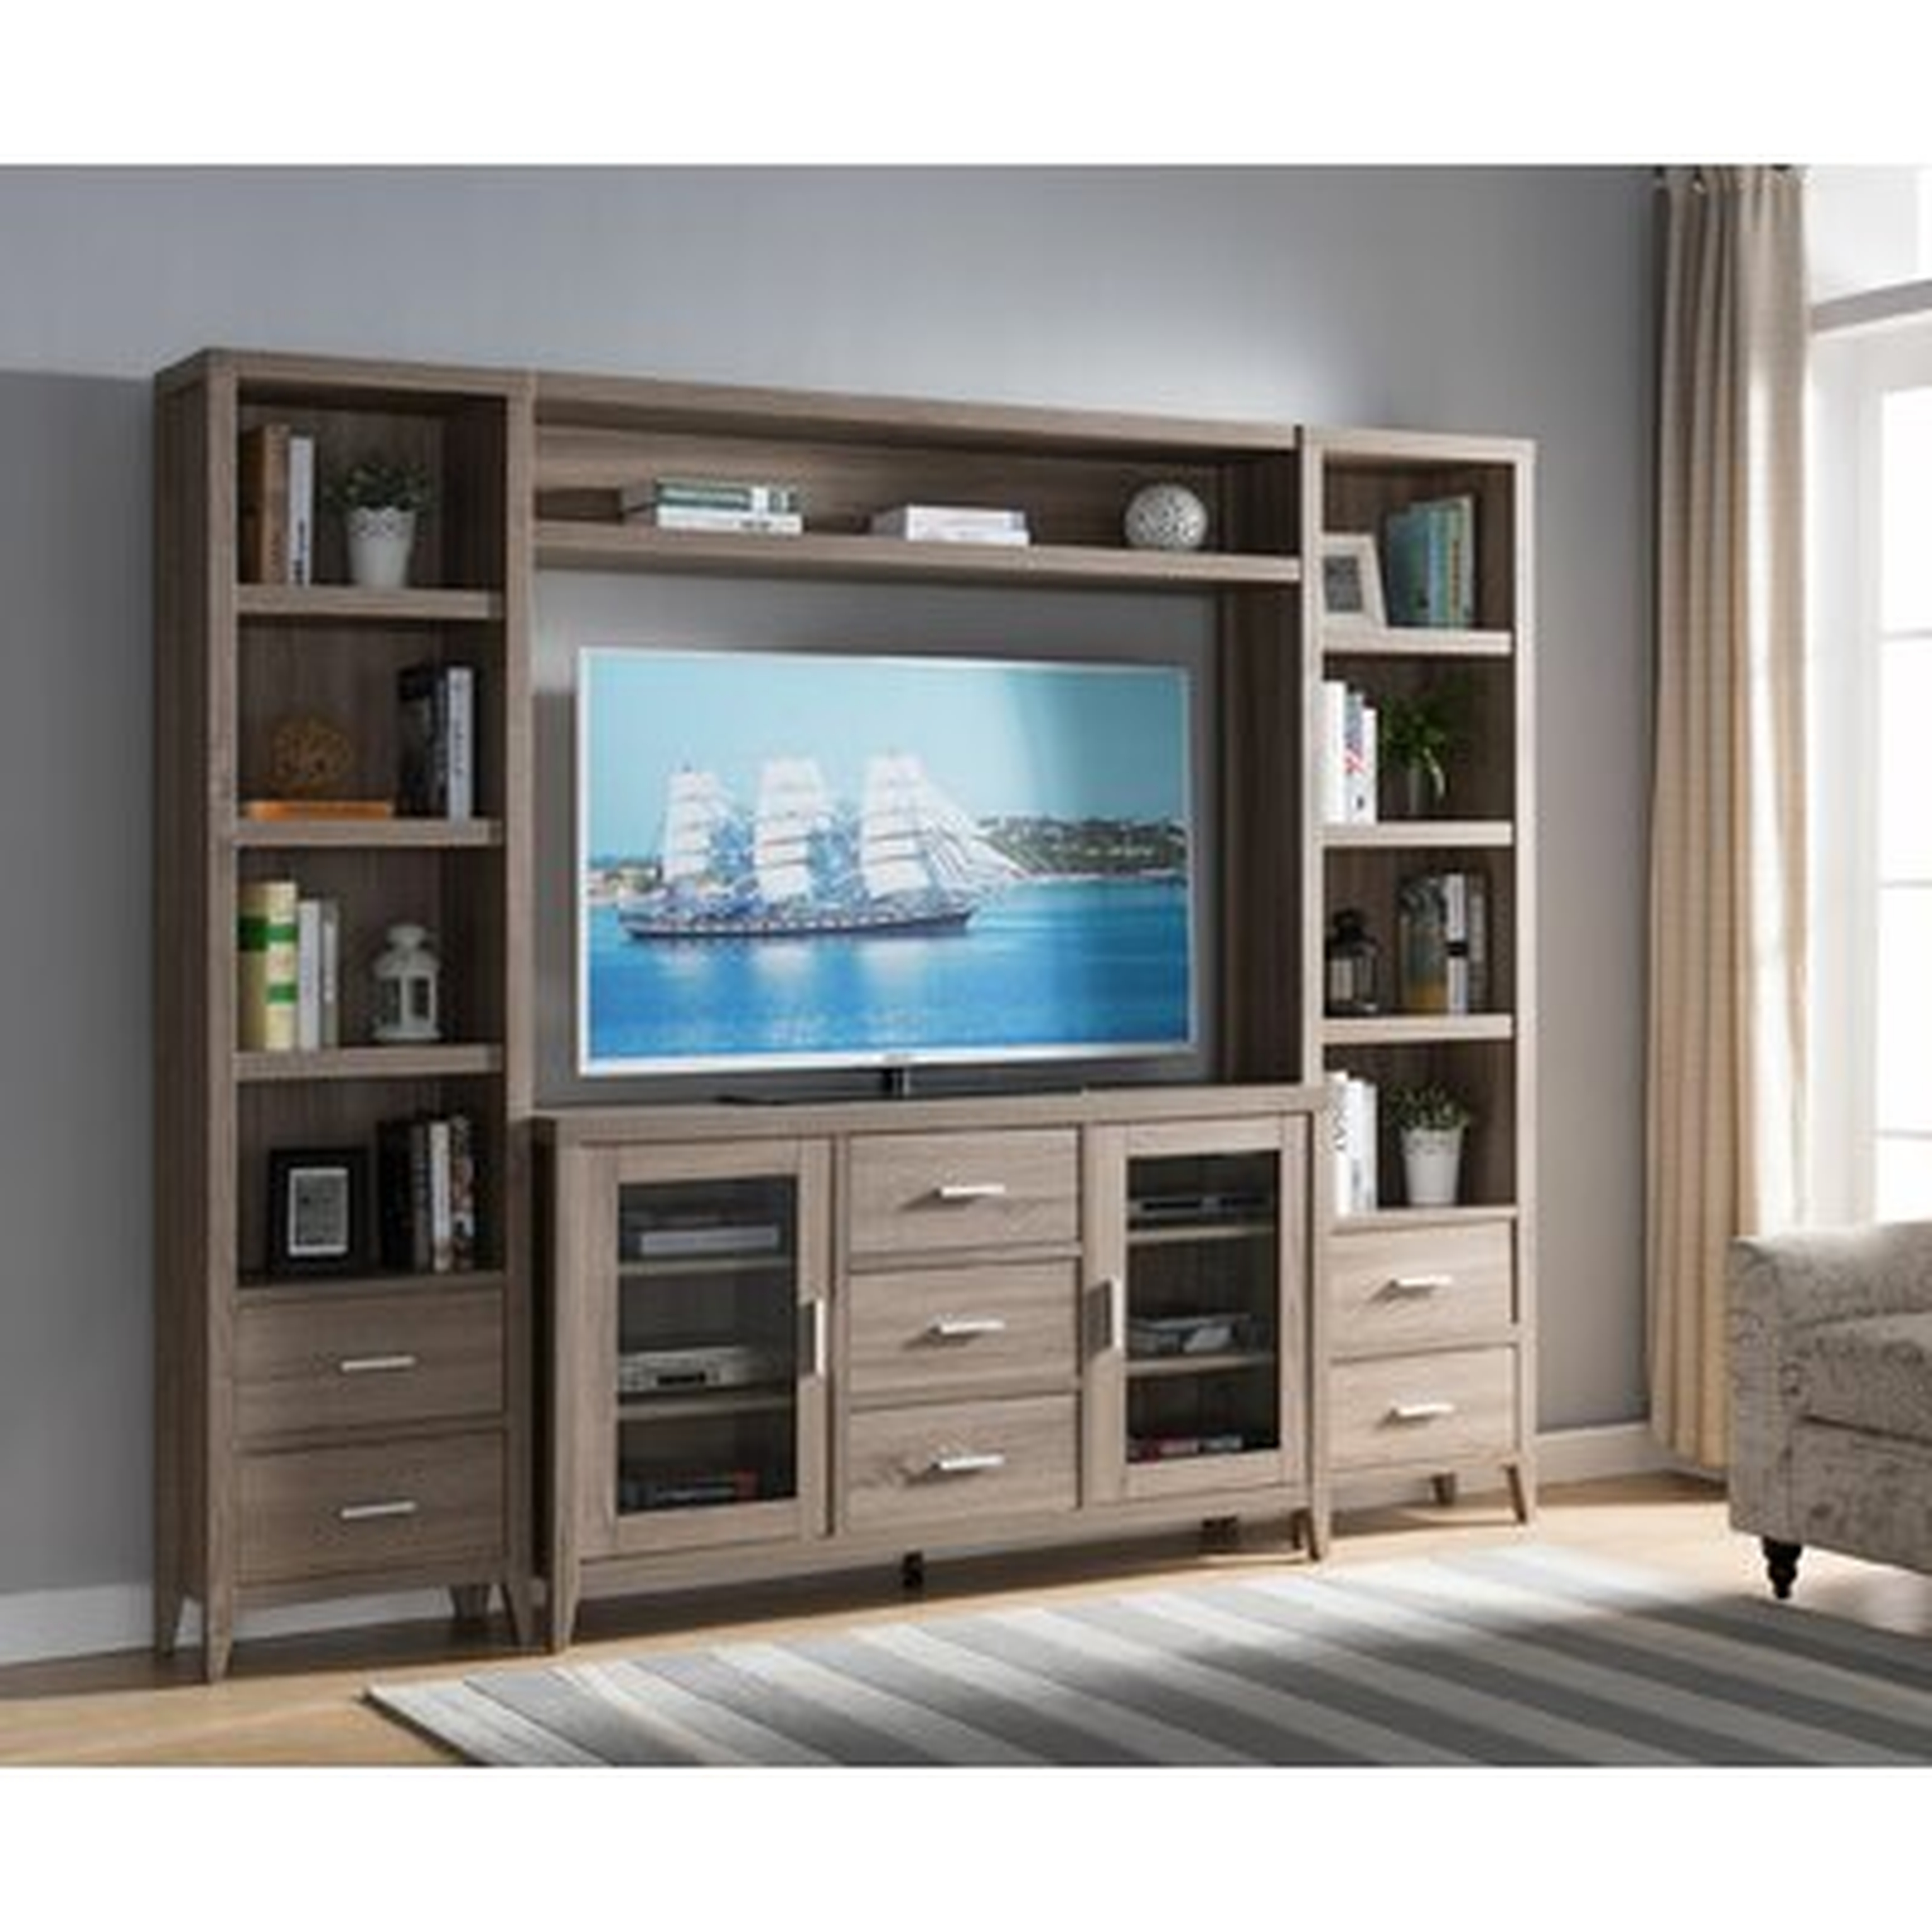 Knezova Entertainment Center for TVs up to 65 inches - Wayfair